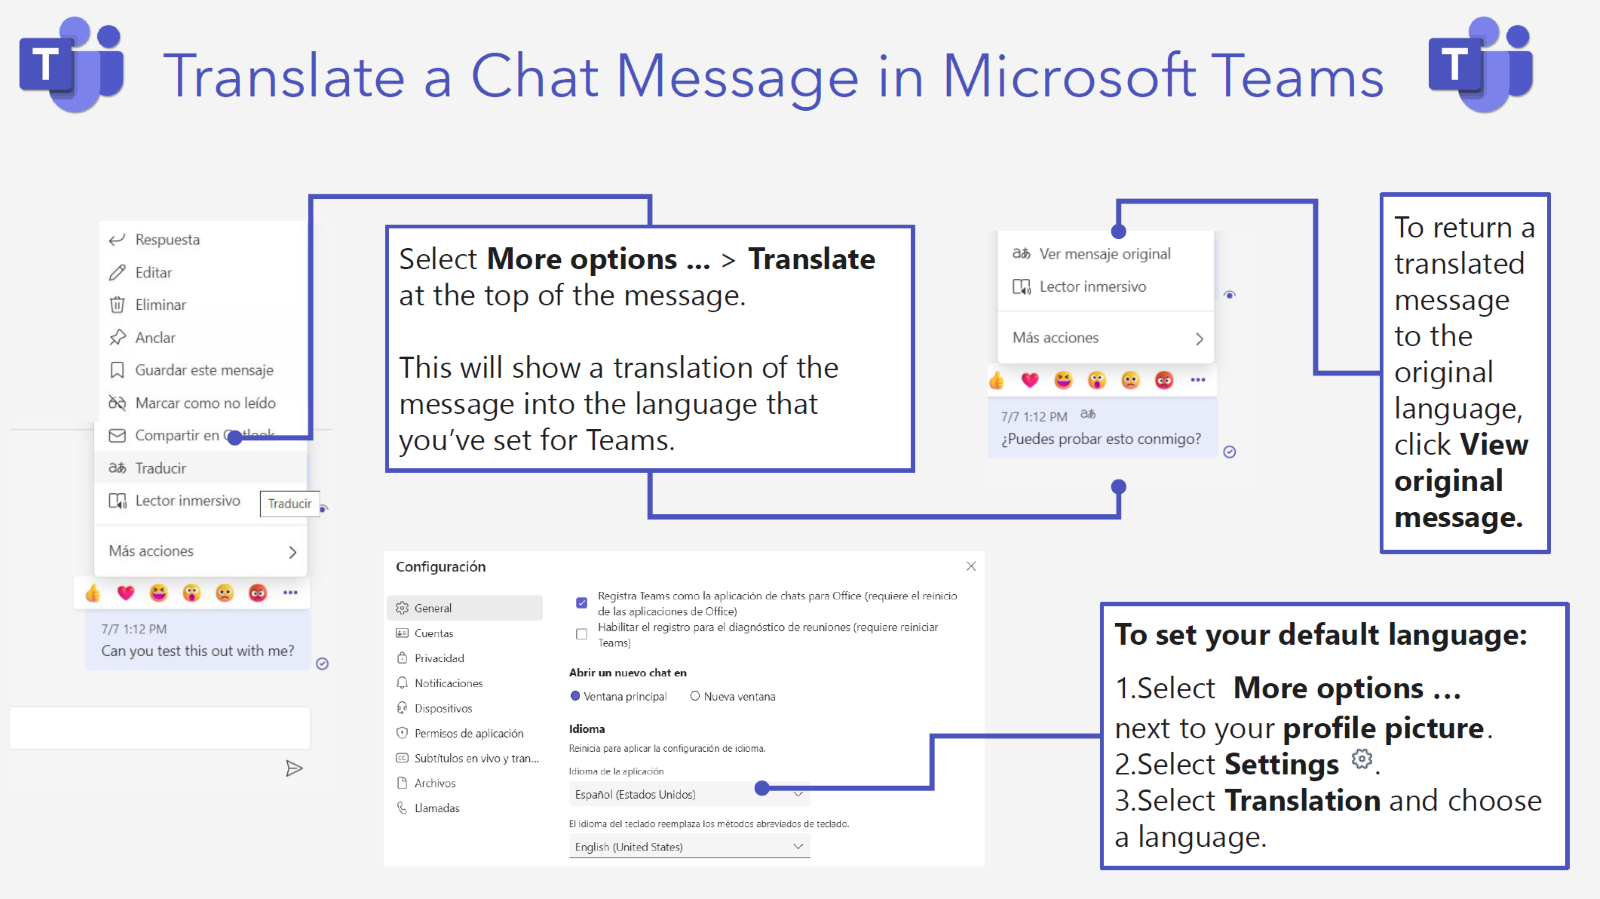 Translating a Chat Message from English to Spanish in Microsoft Teams